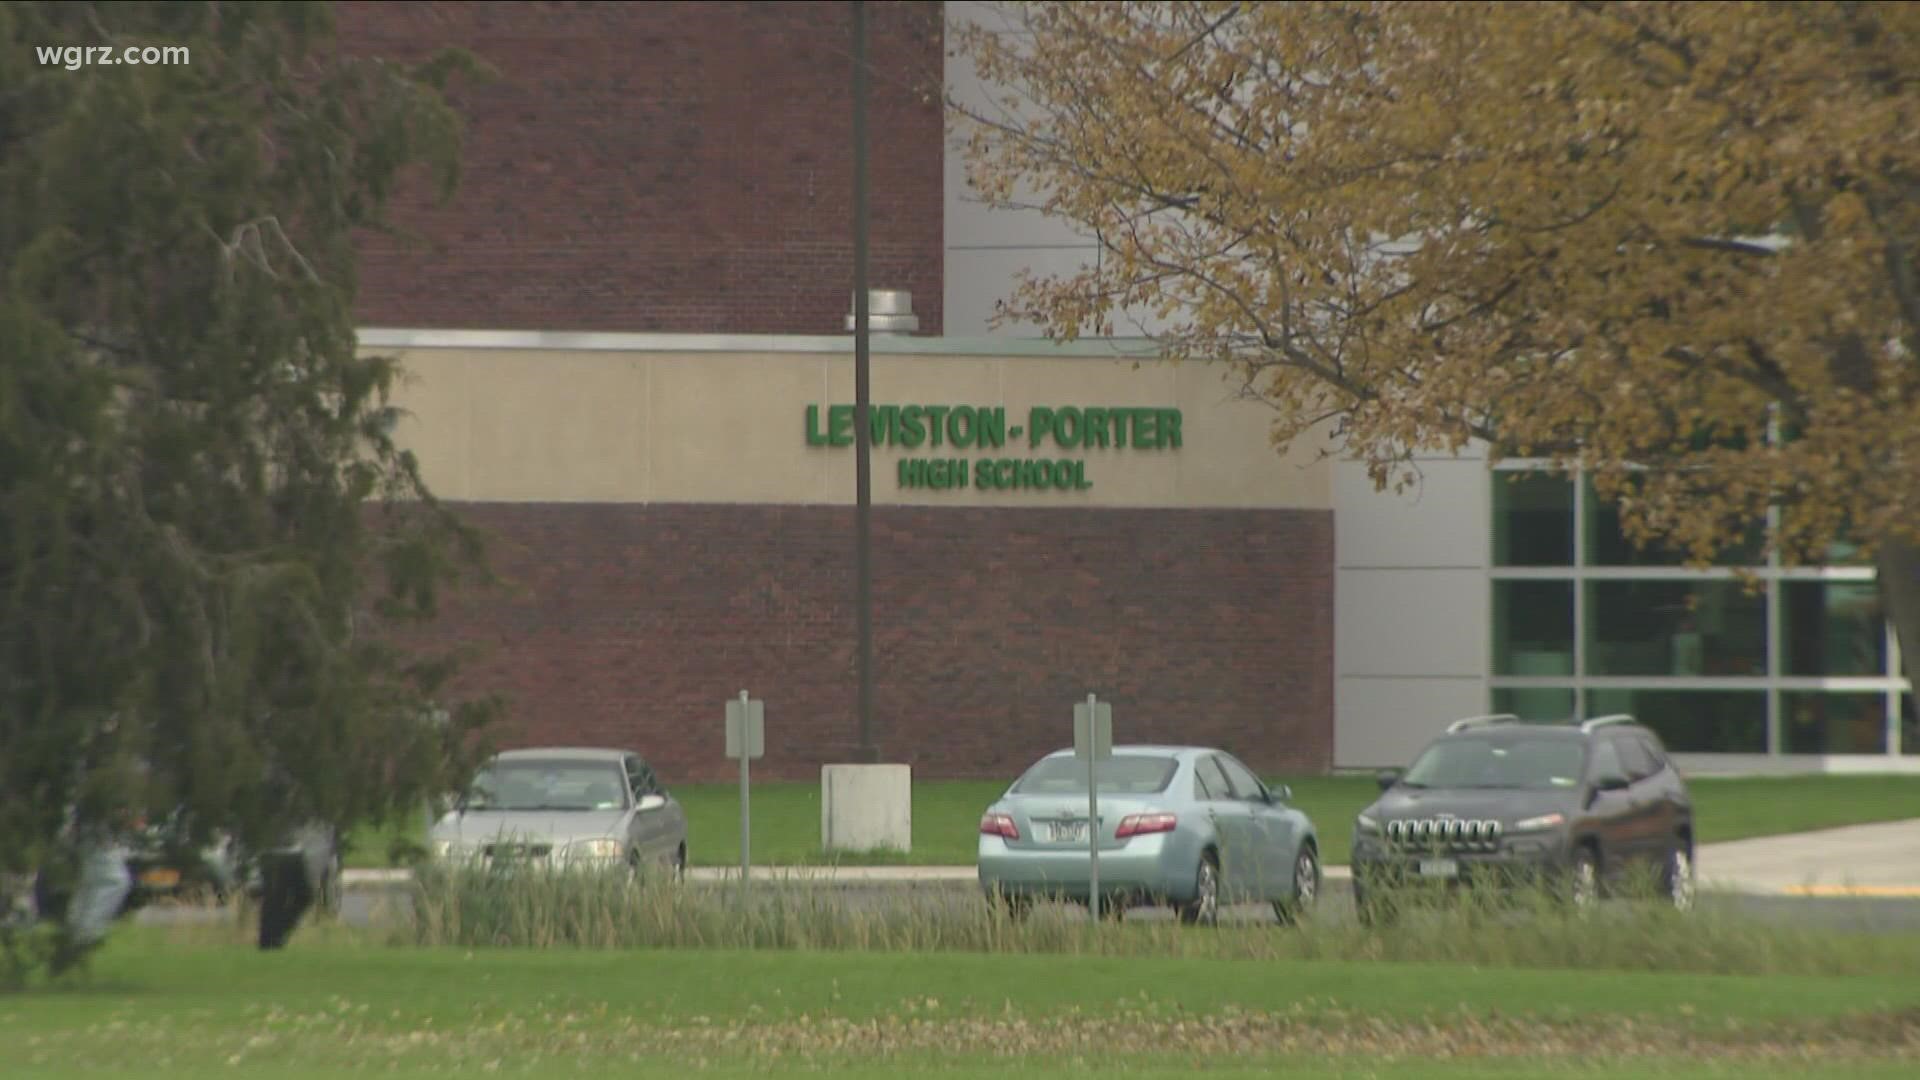 due to a power outage at the building... Lewiston Porter High School is switching to remote learning on Monday.